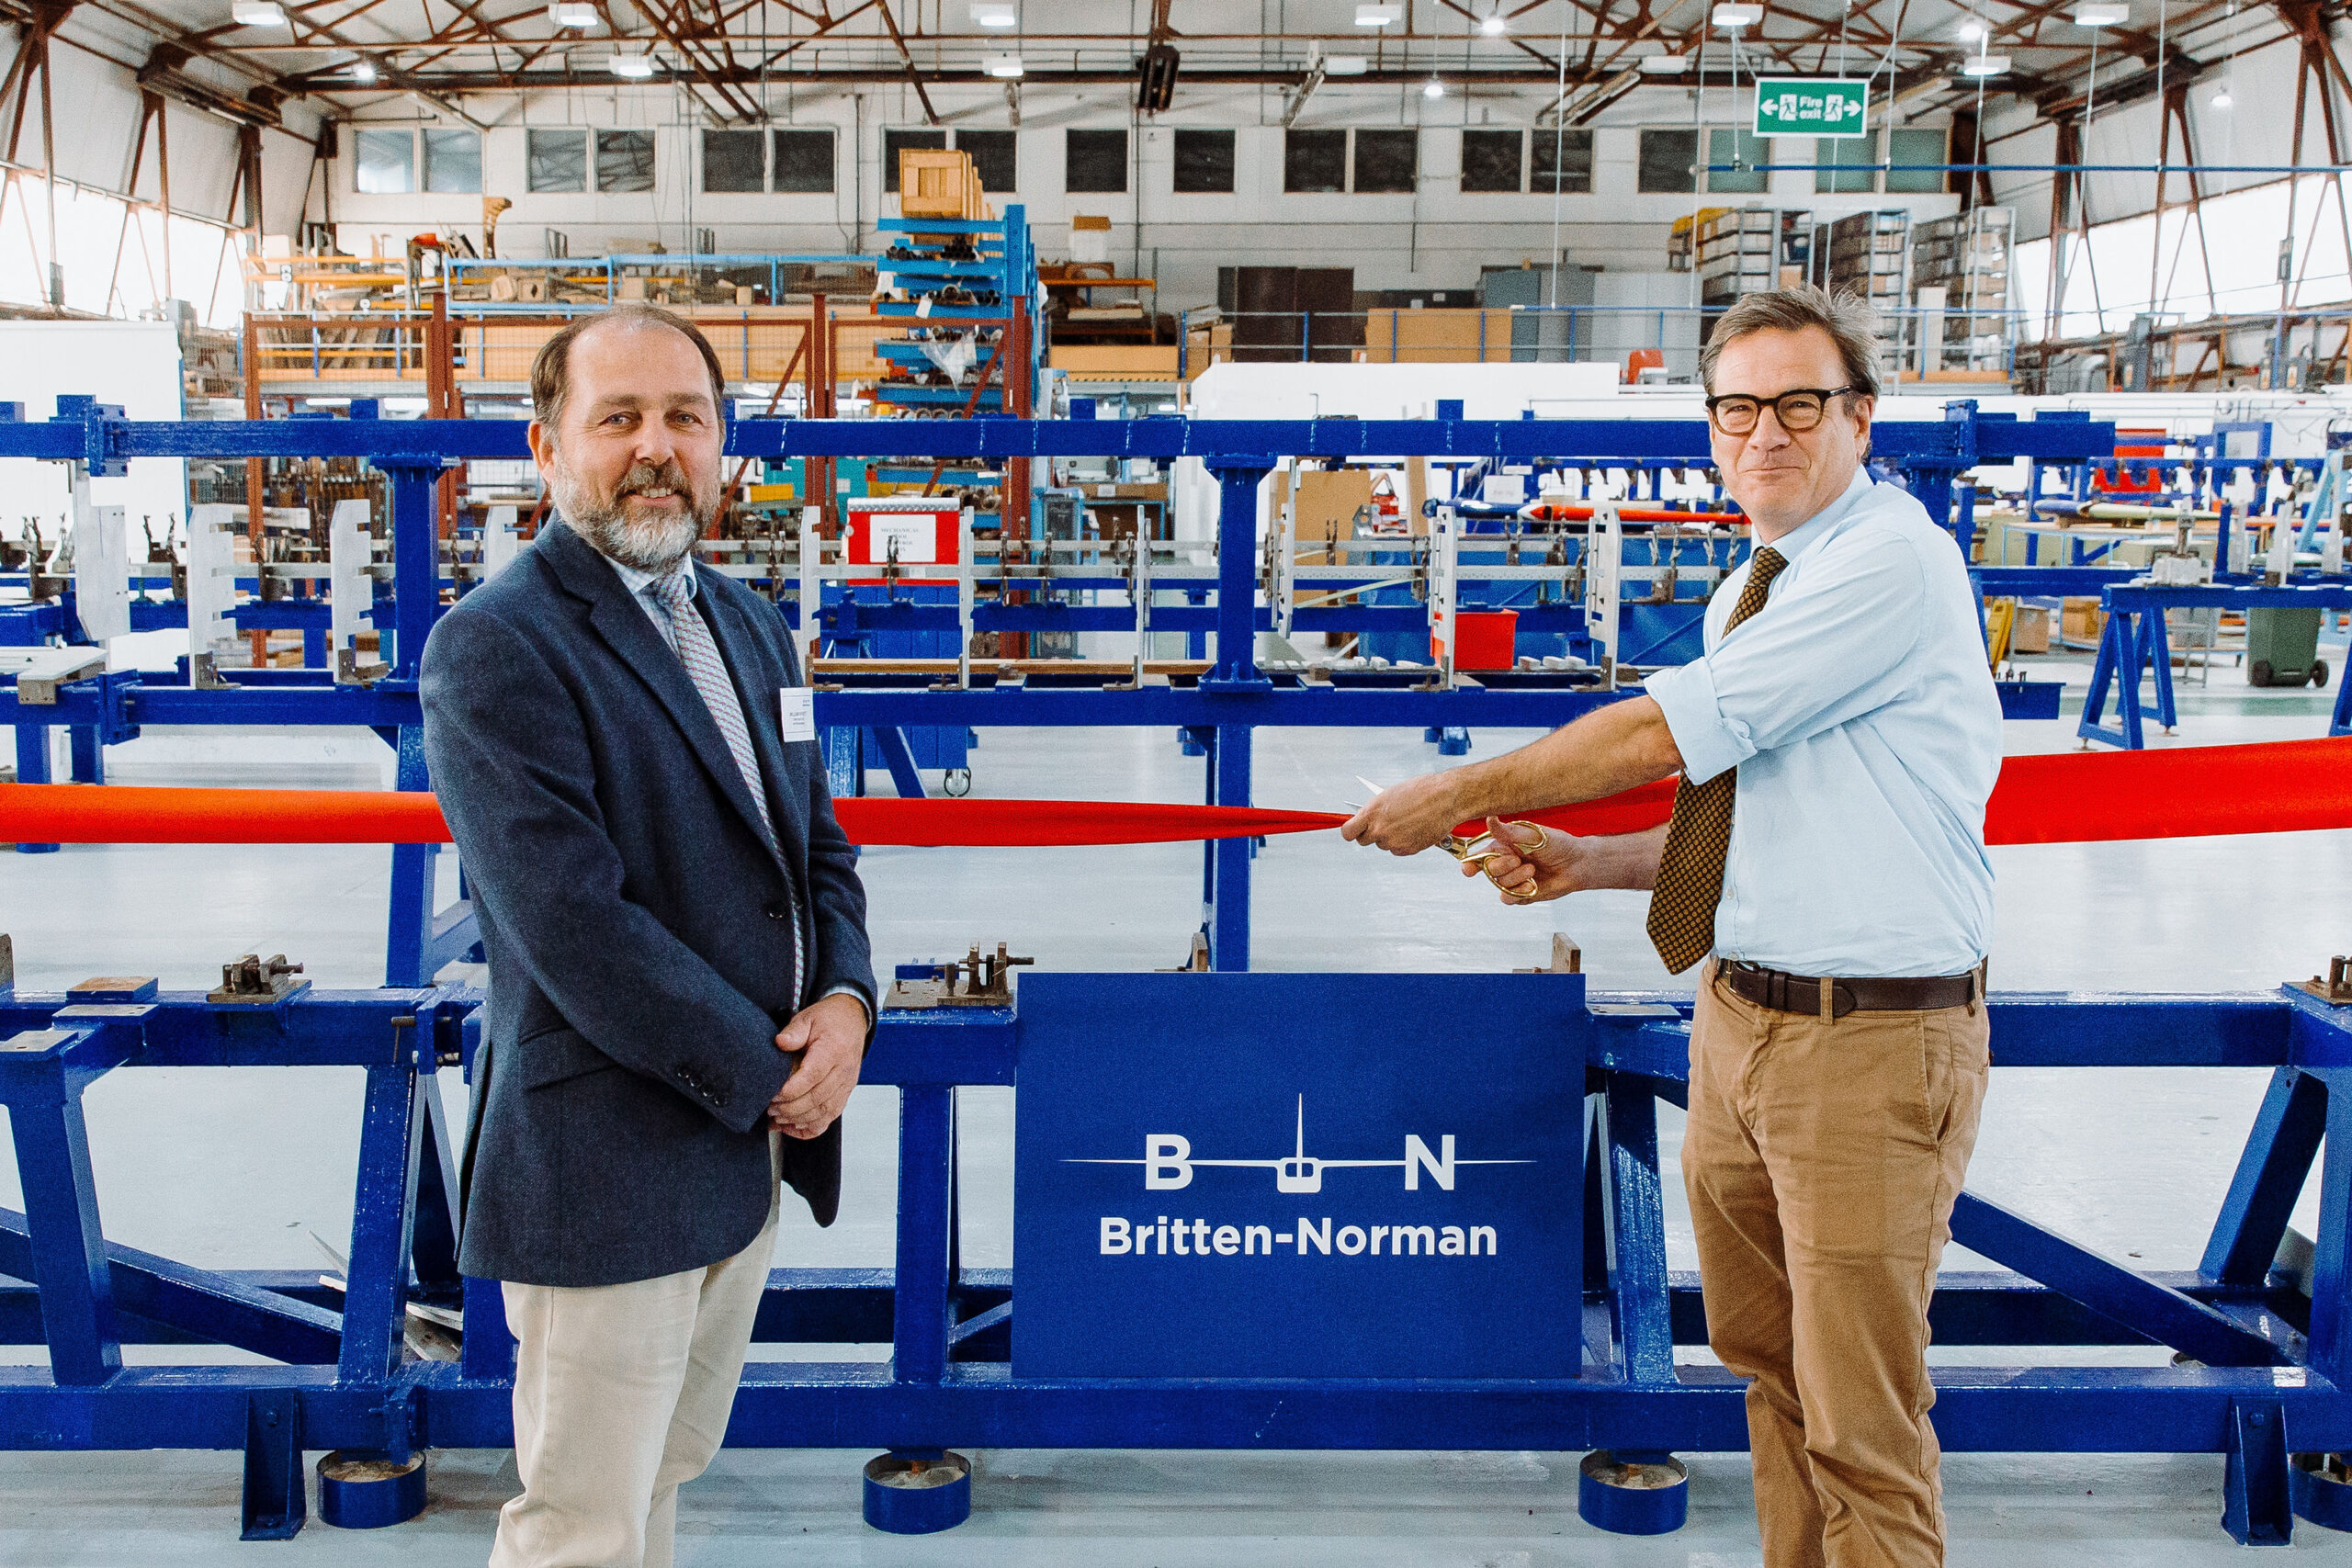 The new production line officially opened with a ribbon-cutting ceremony